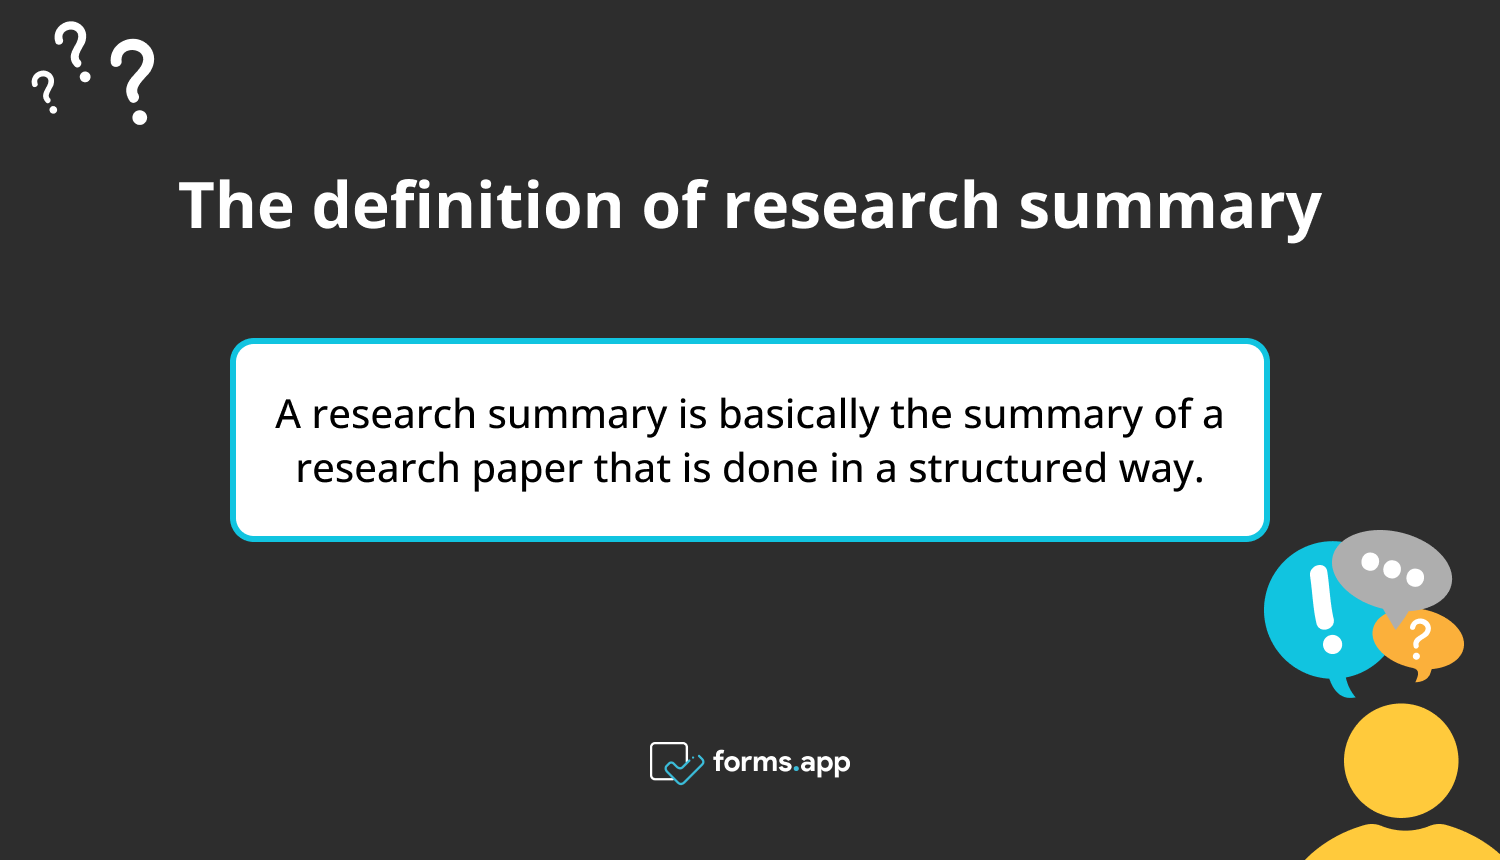 The definition of research summary